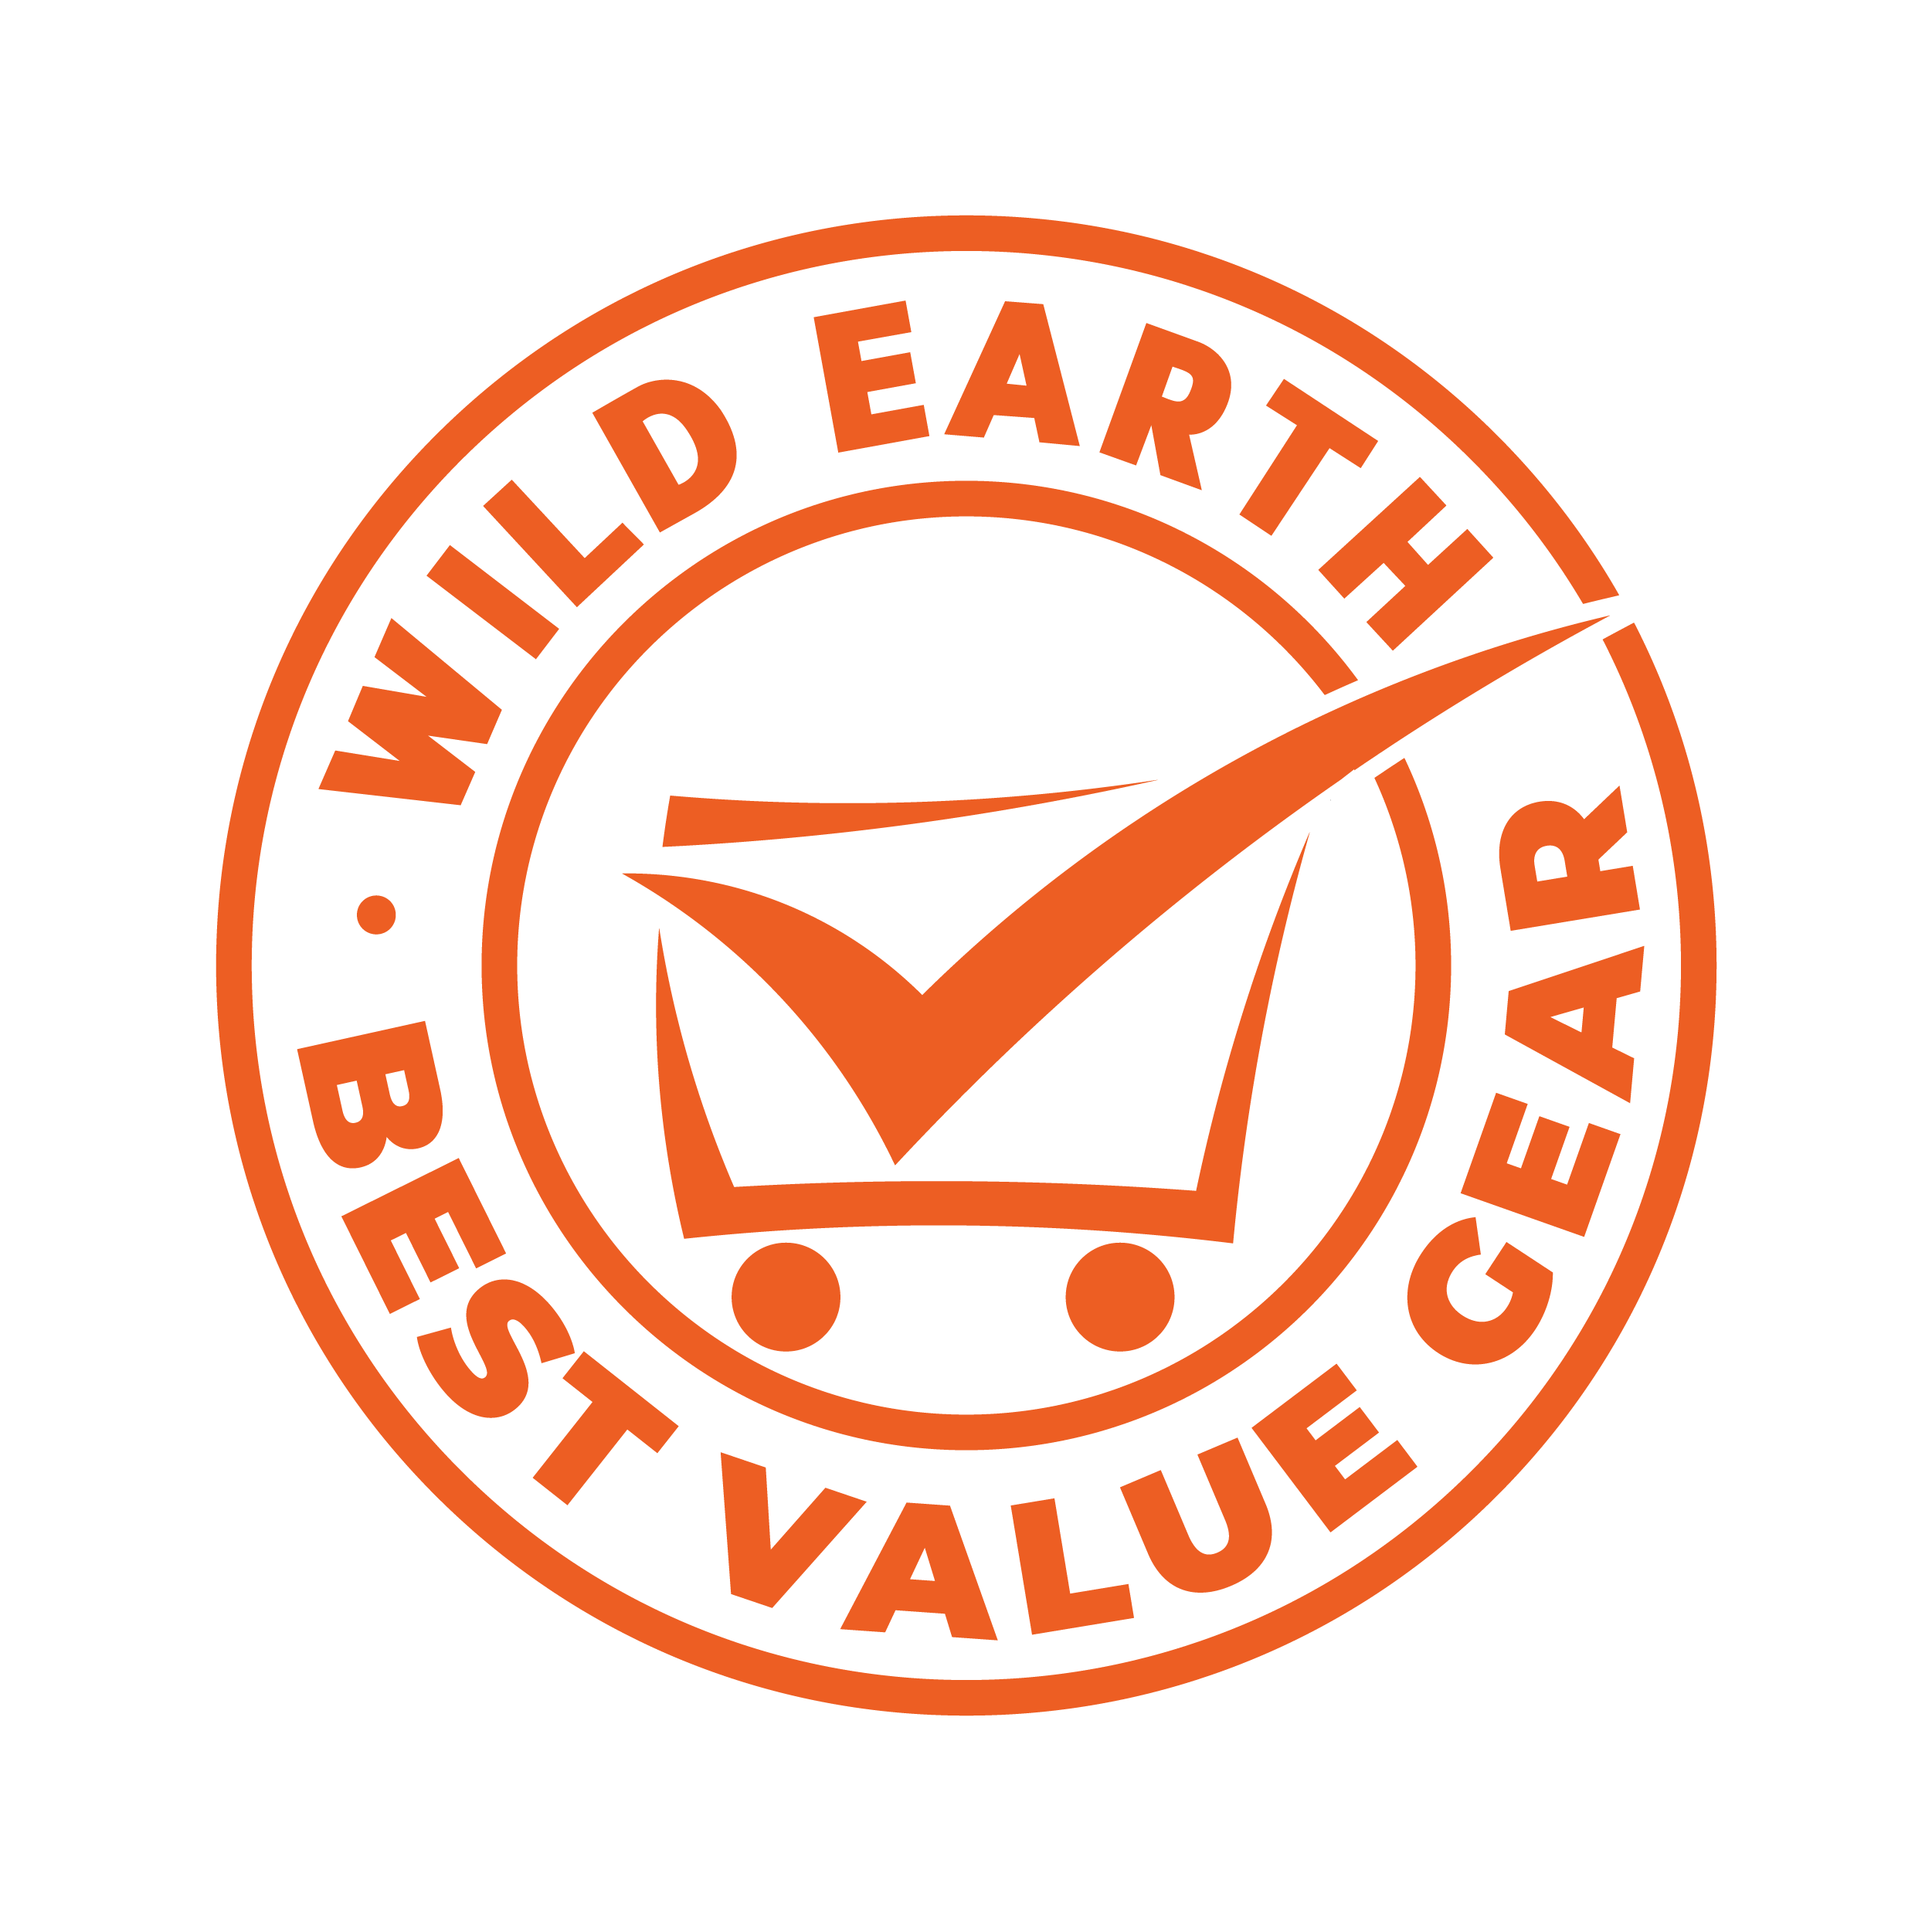 Wild Earth Best Value Gear product!